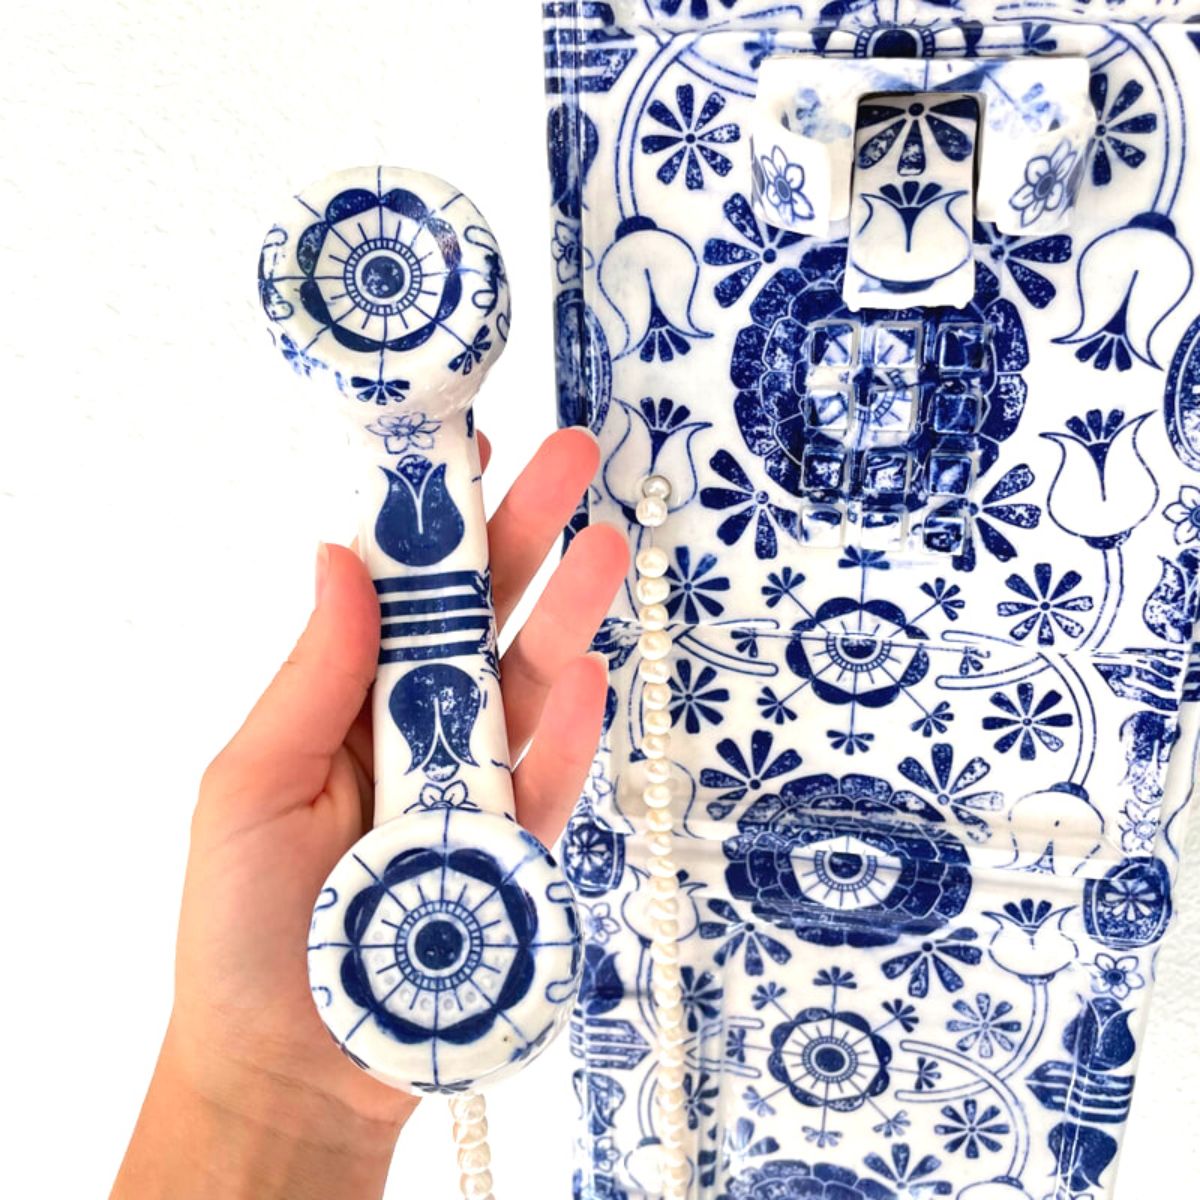 Telephone booth with Chinese porcelain display